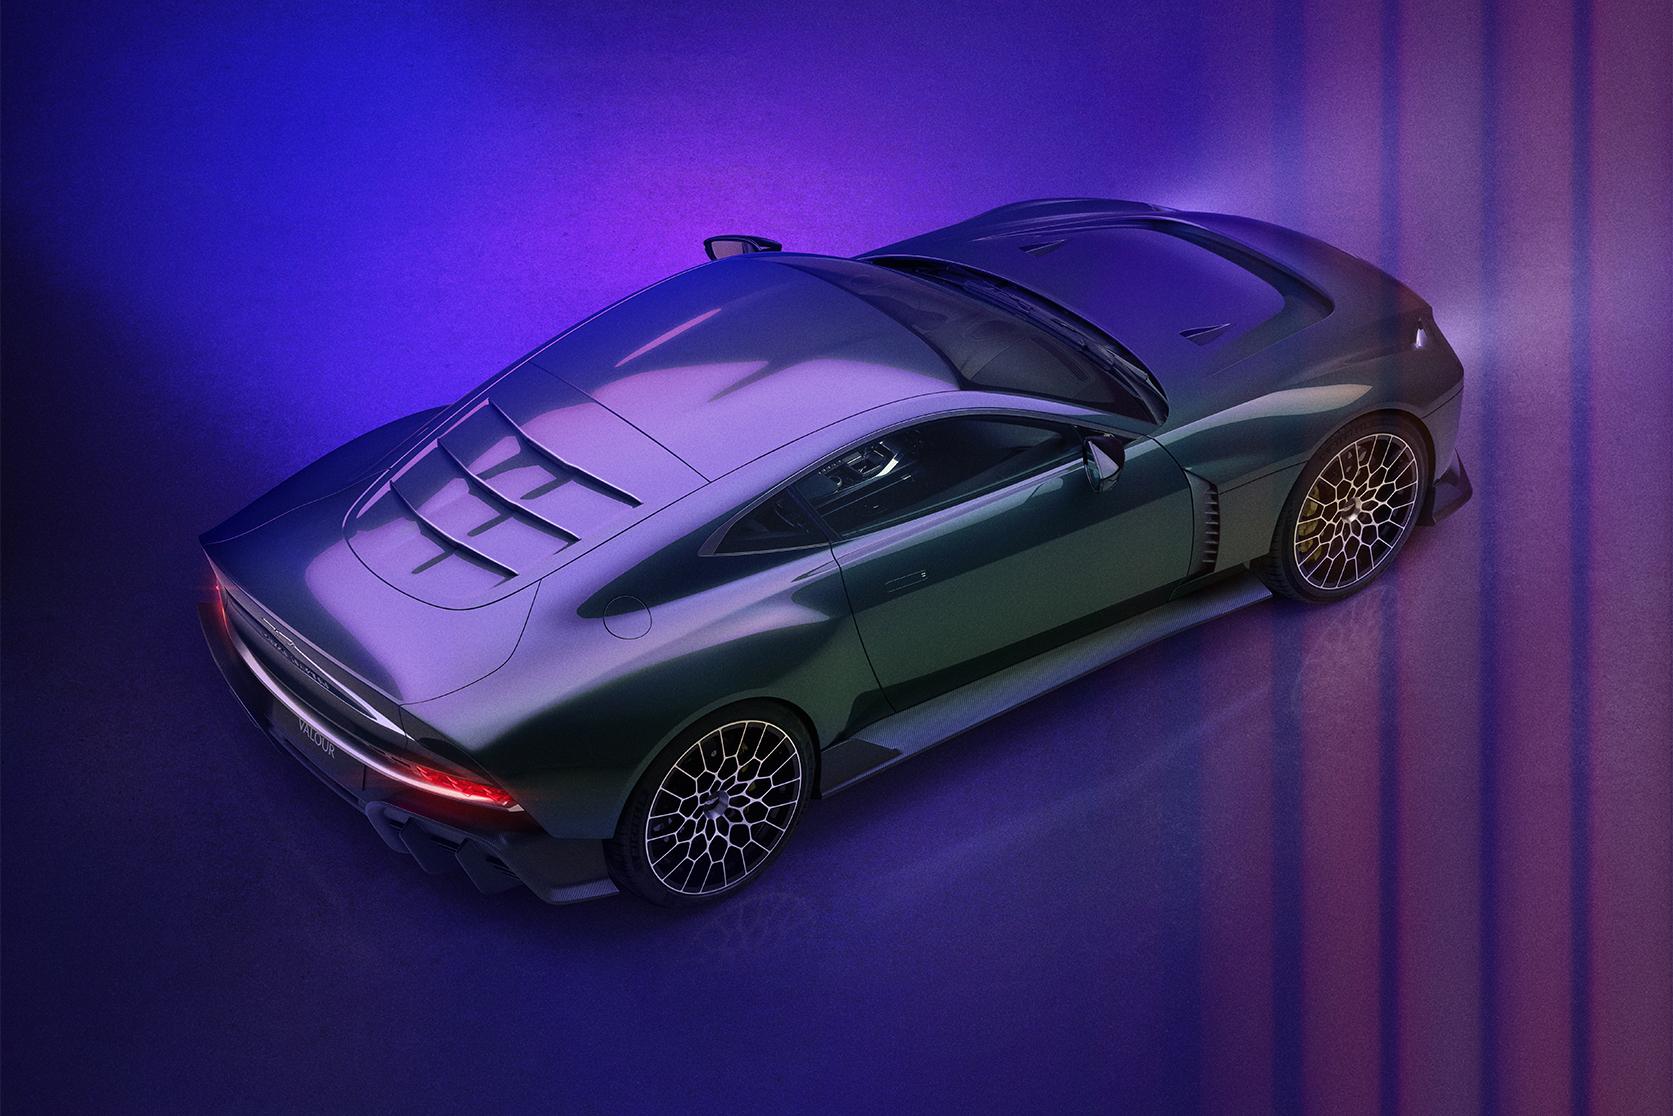 The Aston Martin Victor Is a One-Off Supercar With 836 Horsepower